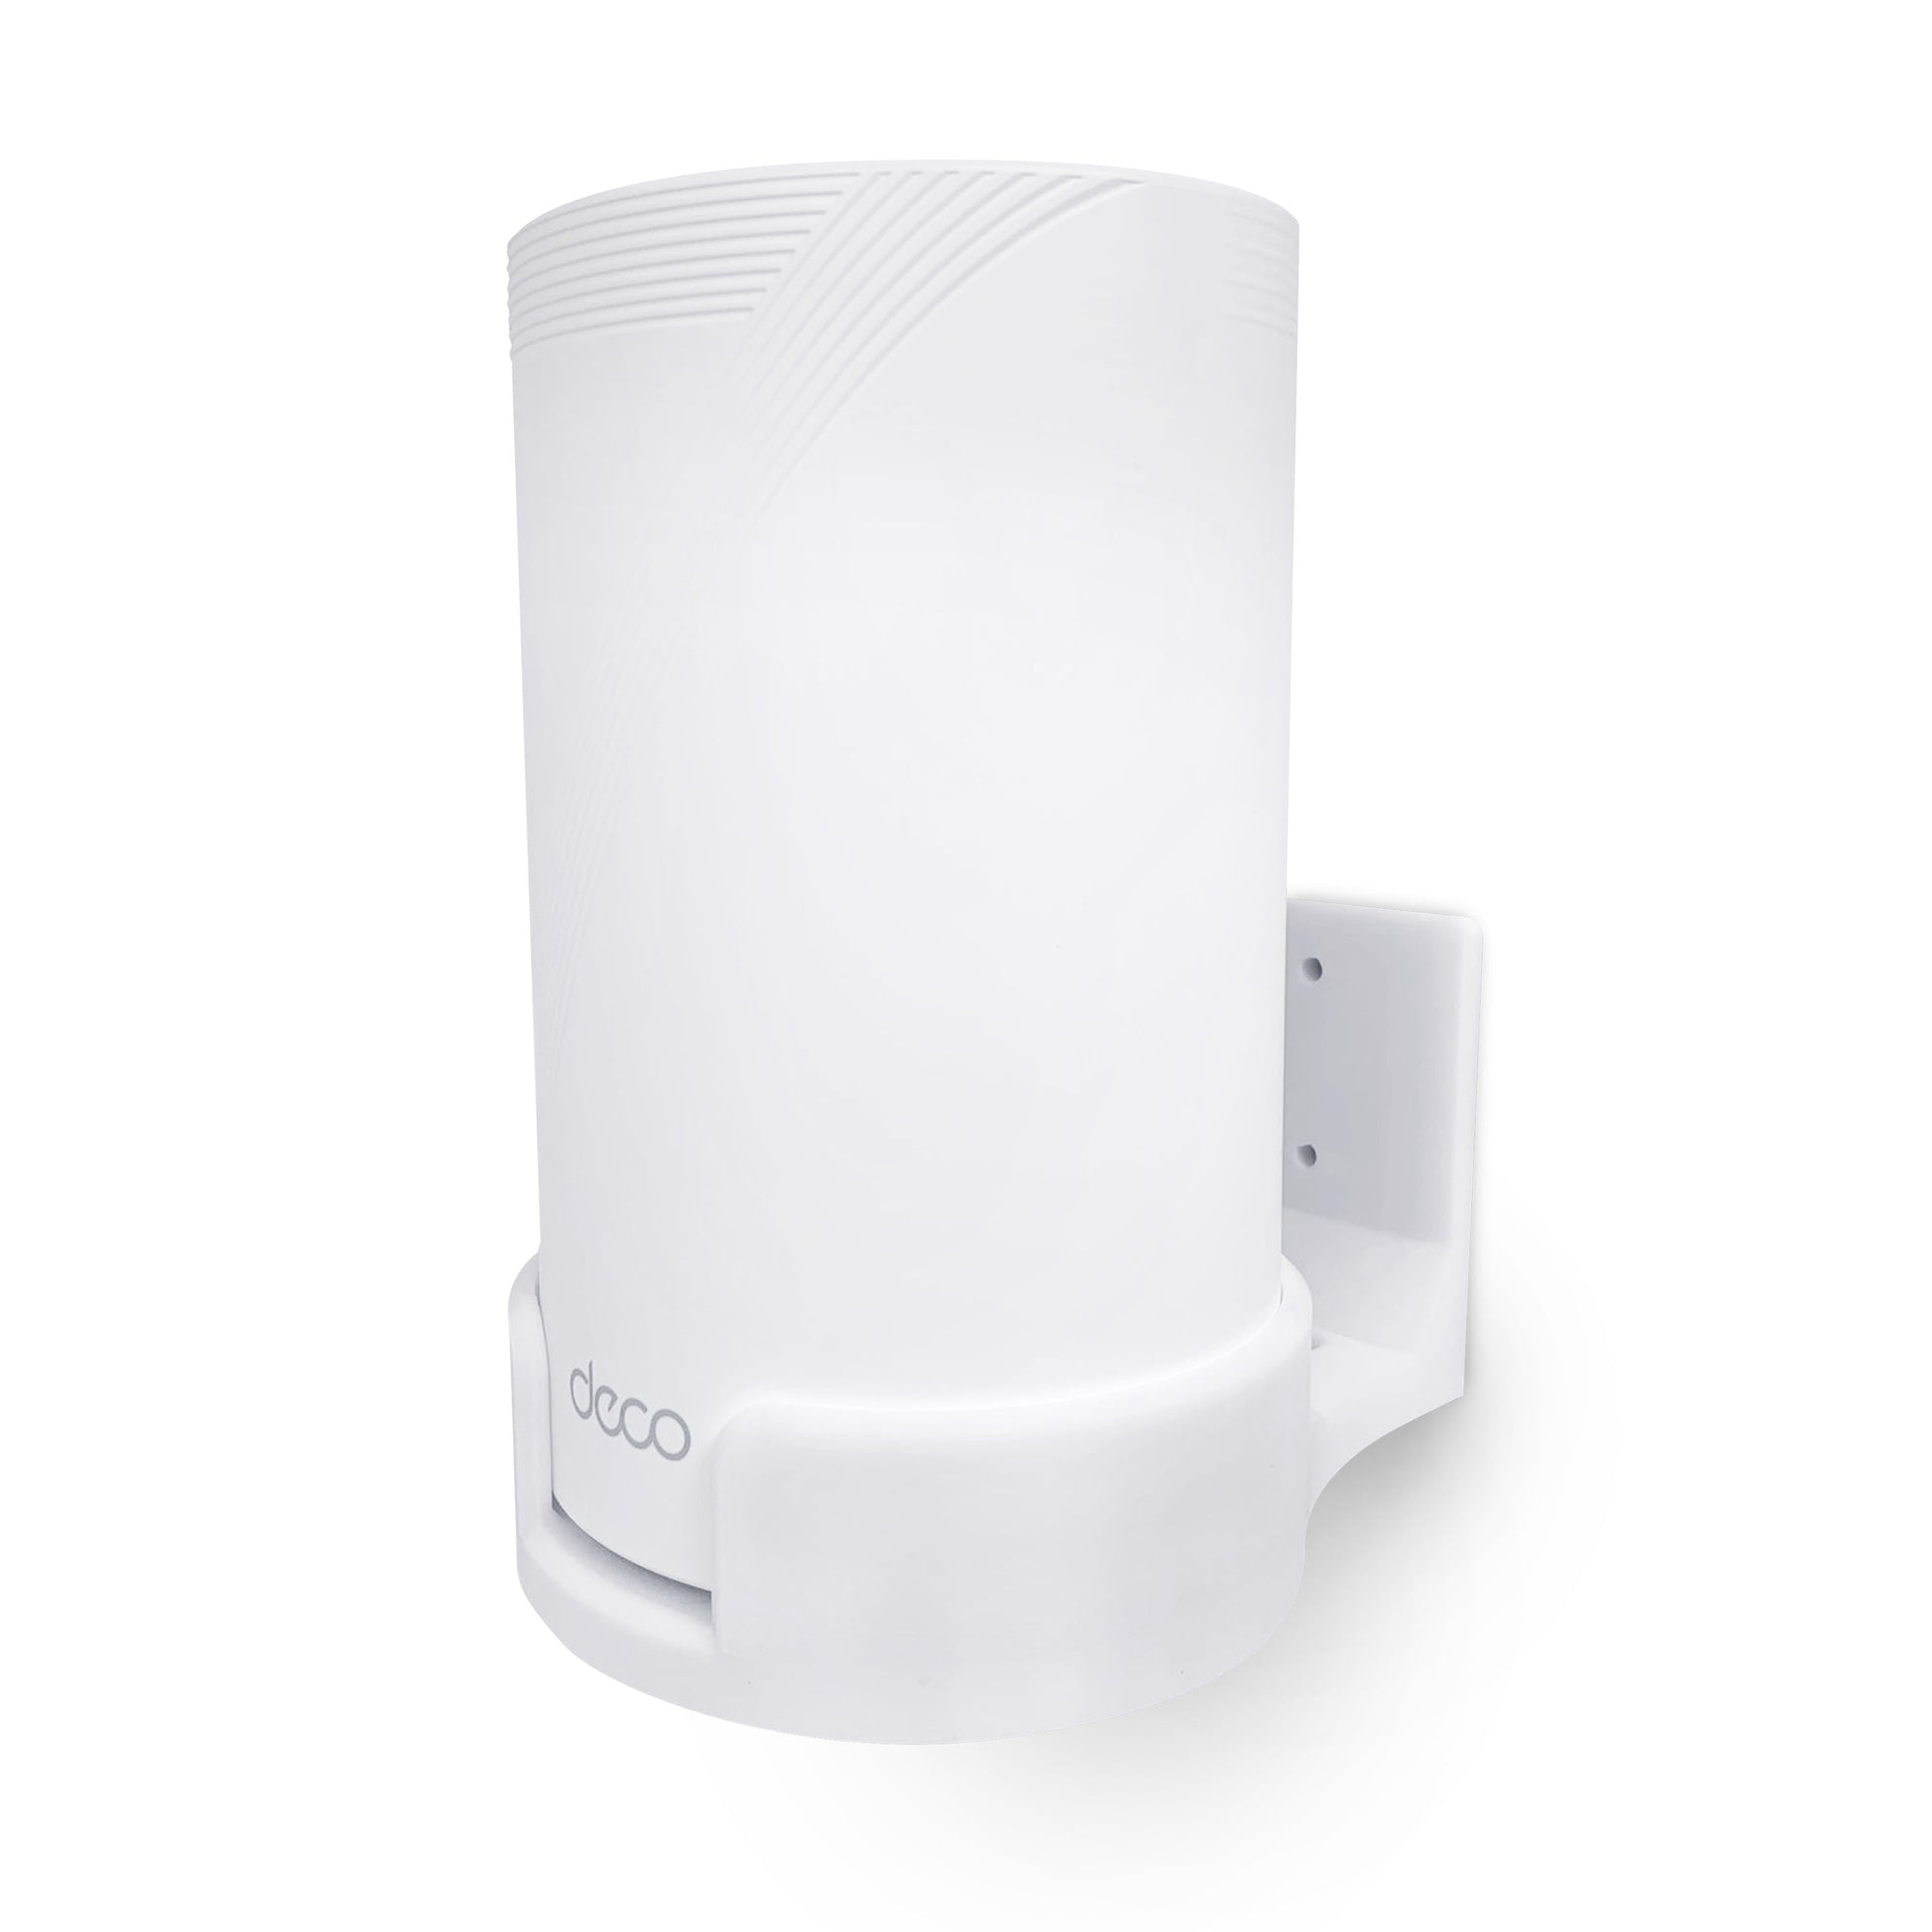 Adhesive Wall Mount for TP Link BE63 (BE1000) WiFi Mesh Router, Easy To Install Holder, Stick On & Screw In Mounting